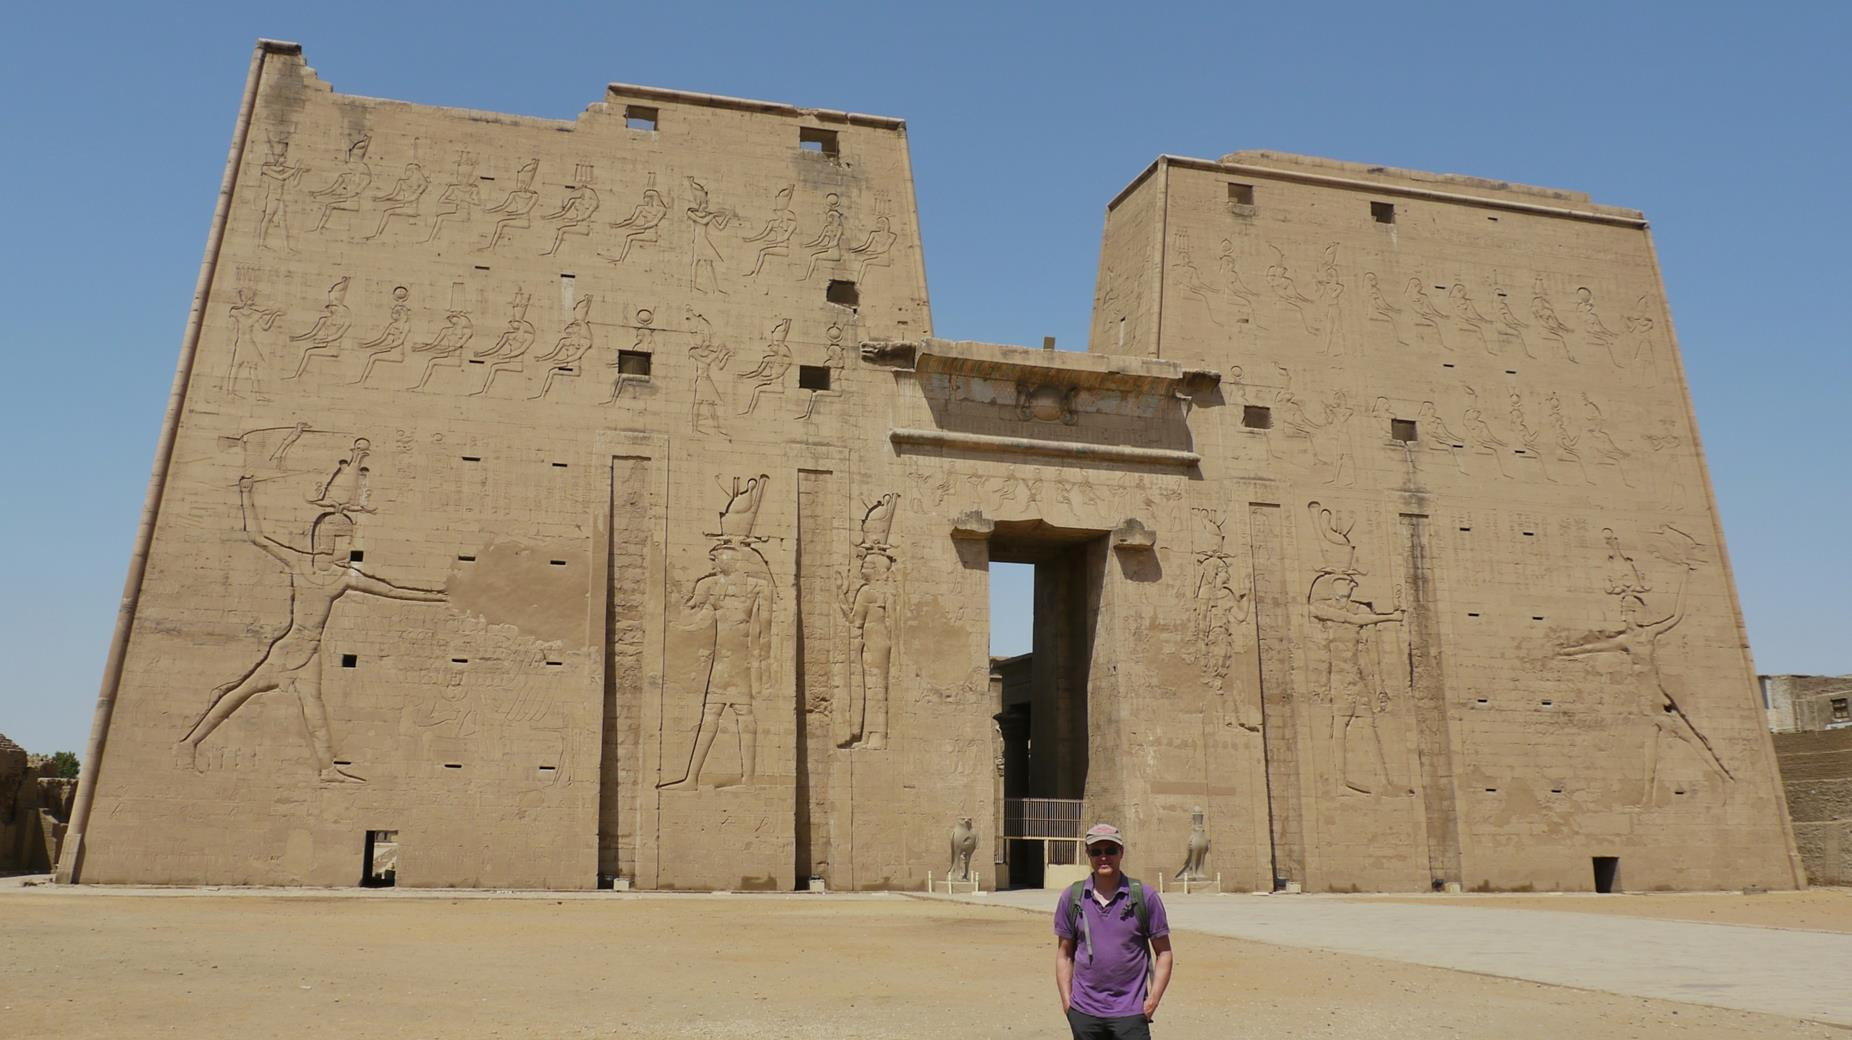 The Temple of Edfu, dedicated to the falcon god Horus, was built between 237 and 57 BC and is one of the best preserved temples in Egypt